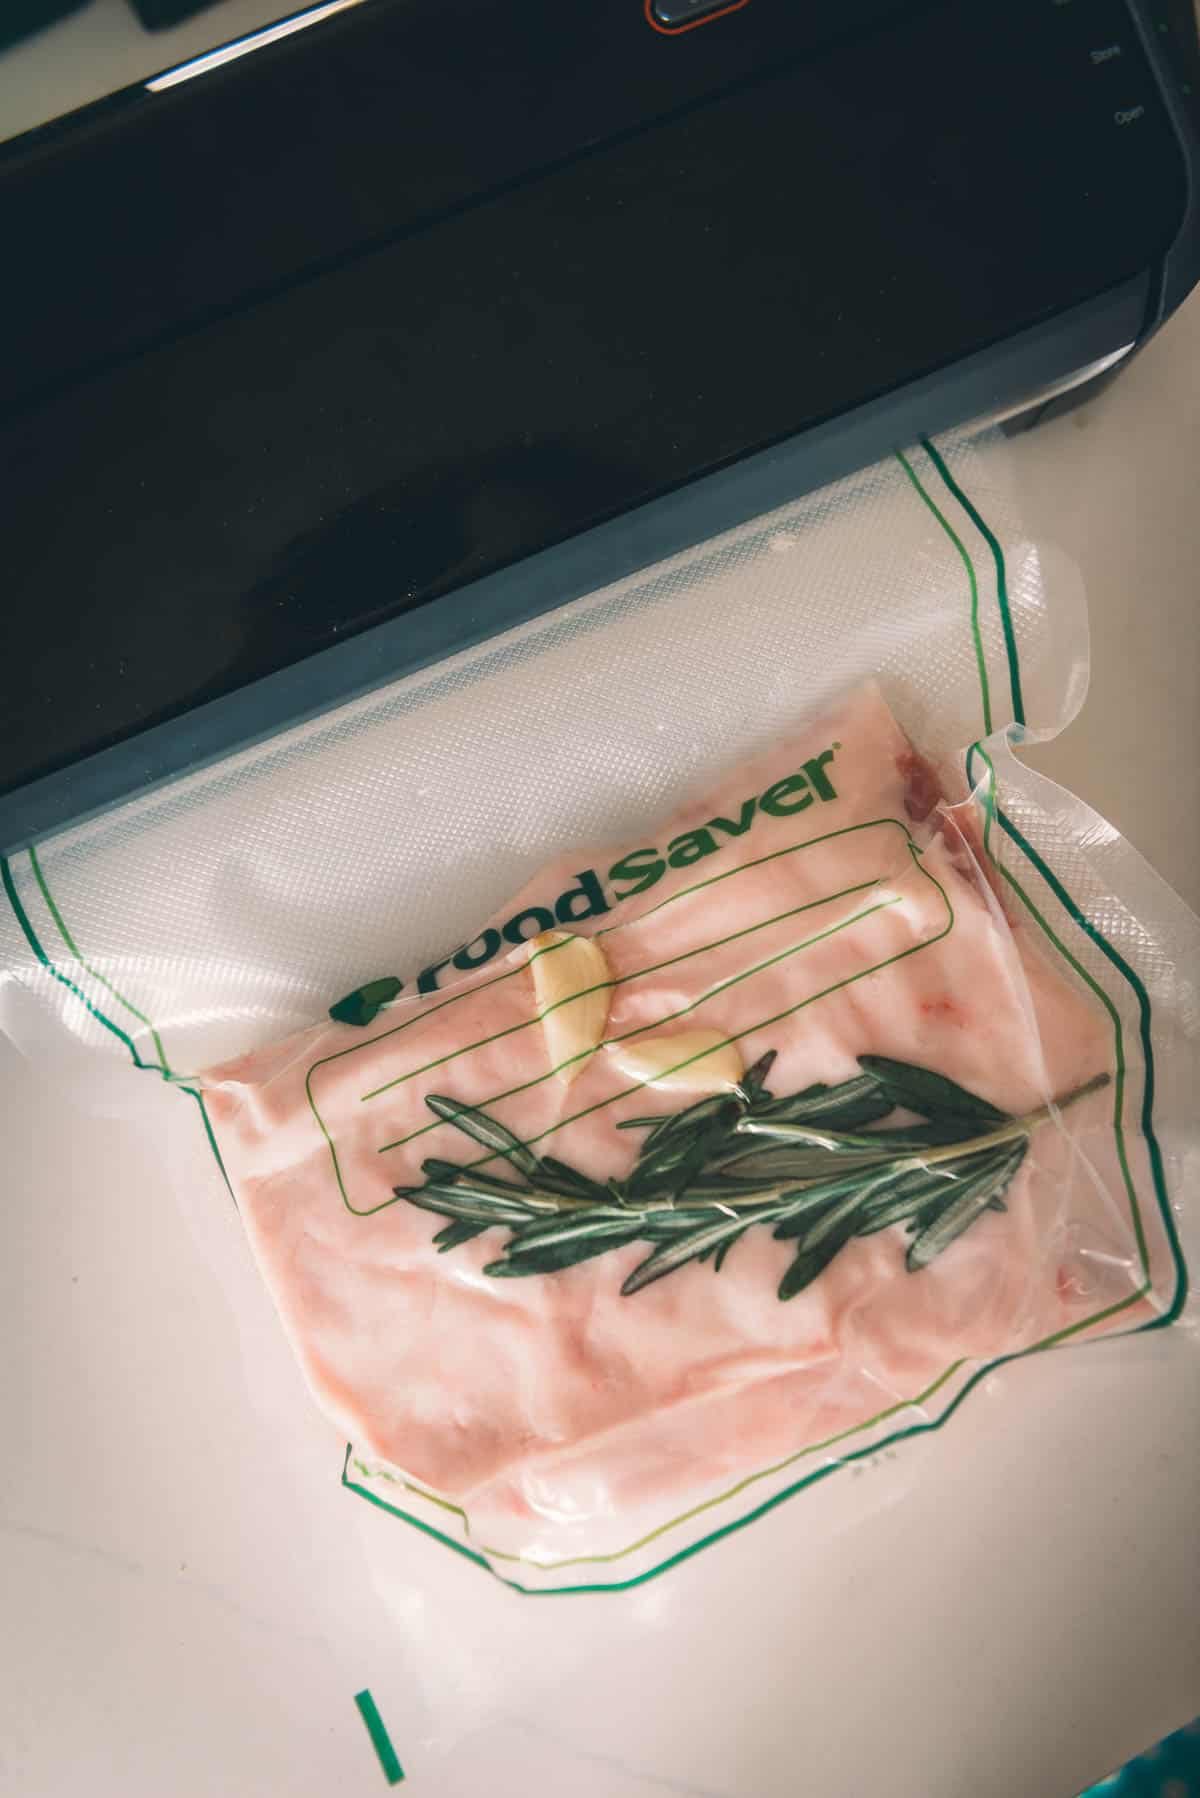 Pork loin in vacuum sealed bag with rosemary and garlic.